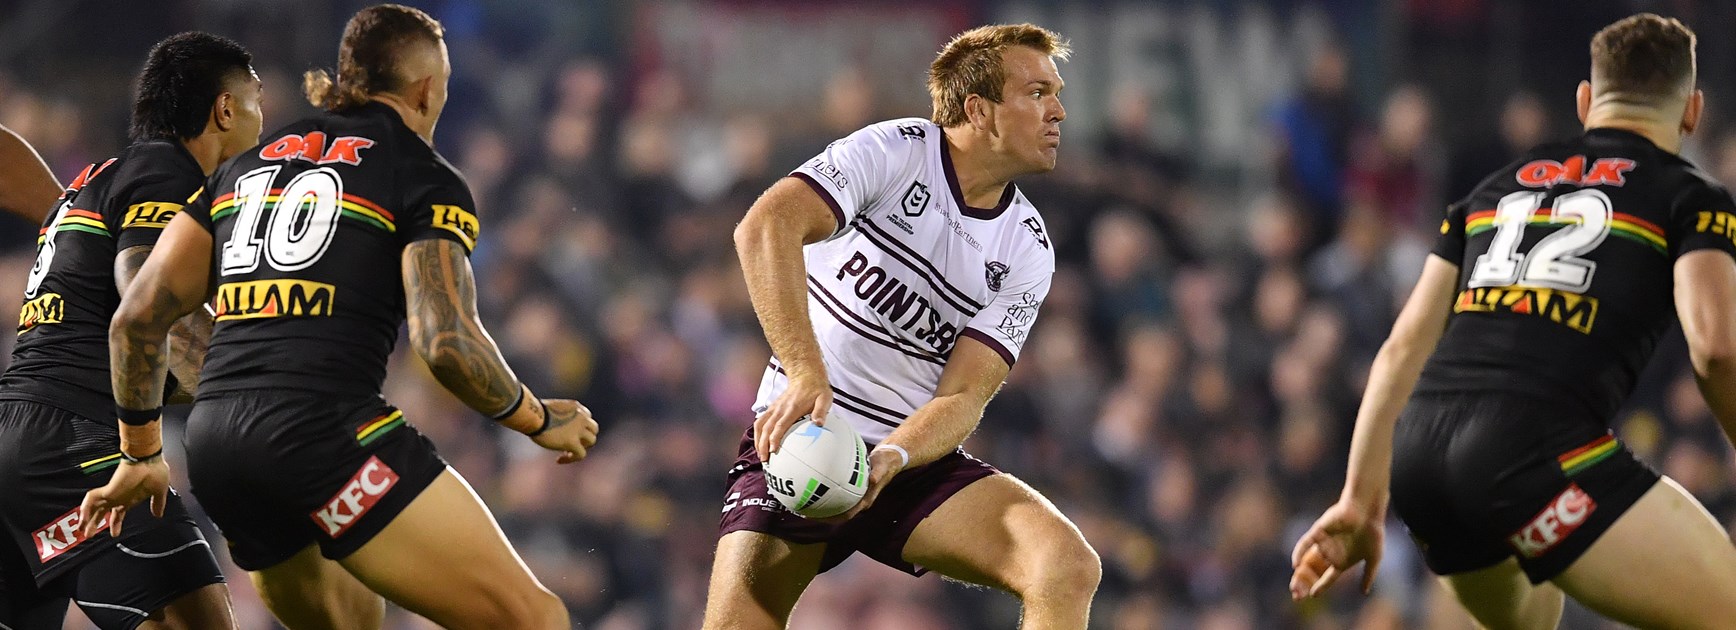 Sea Eagles go down to Panthers in season opener